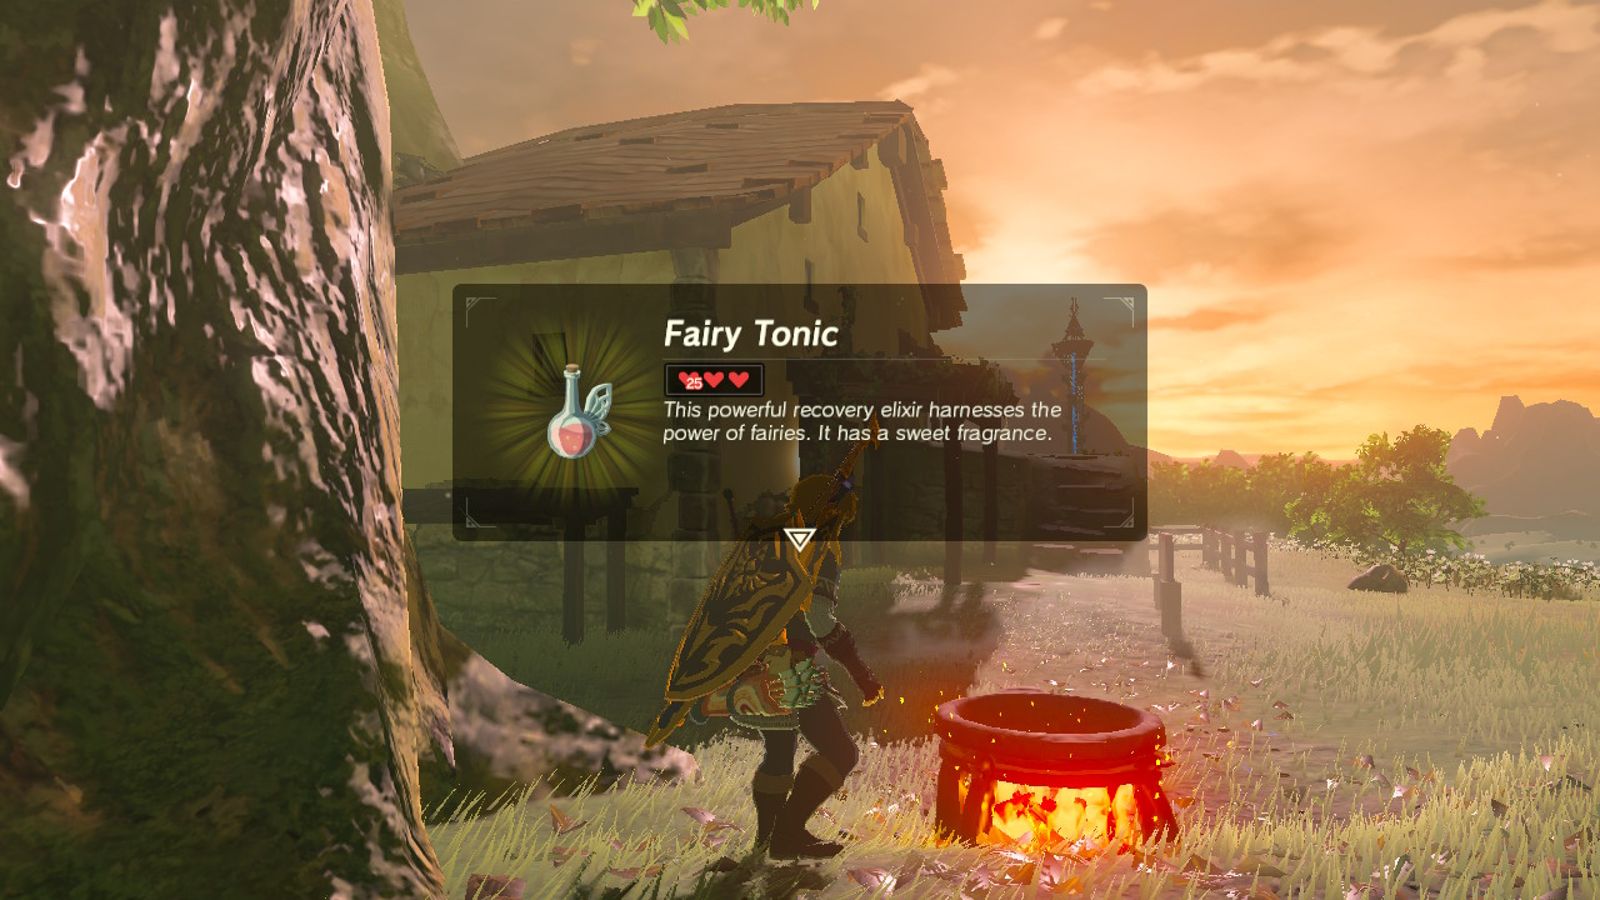 Fairy Tonic is a powerful elixir for heart recovery in BOTW.